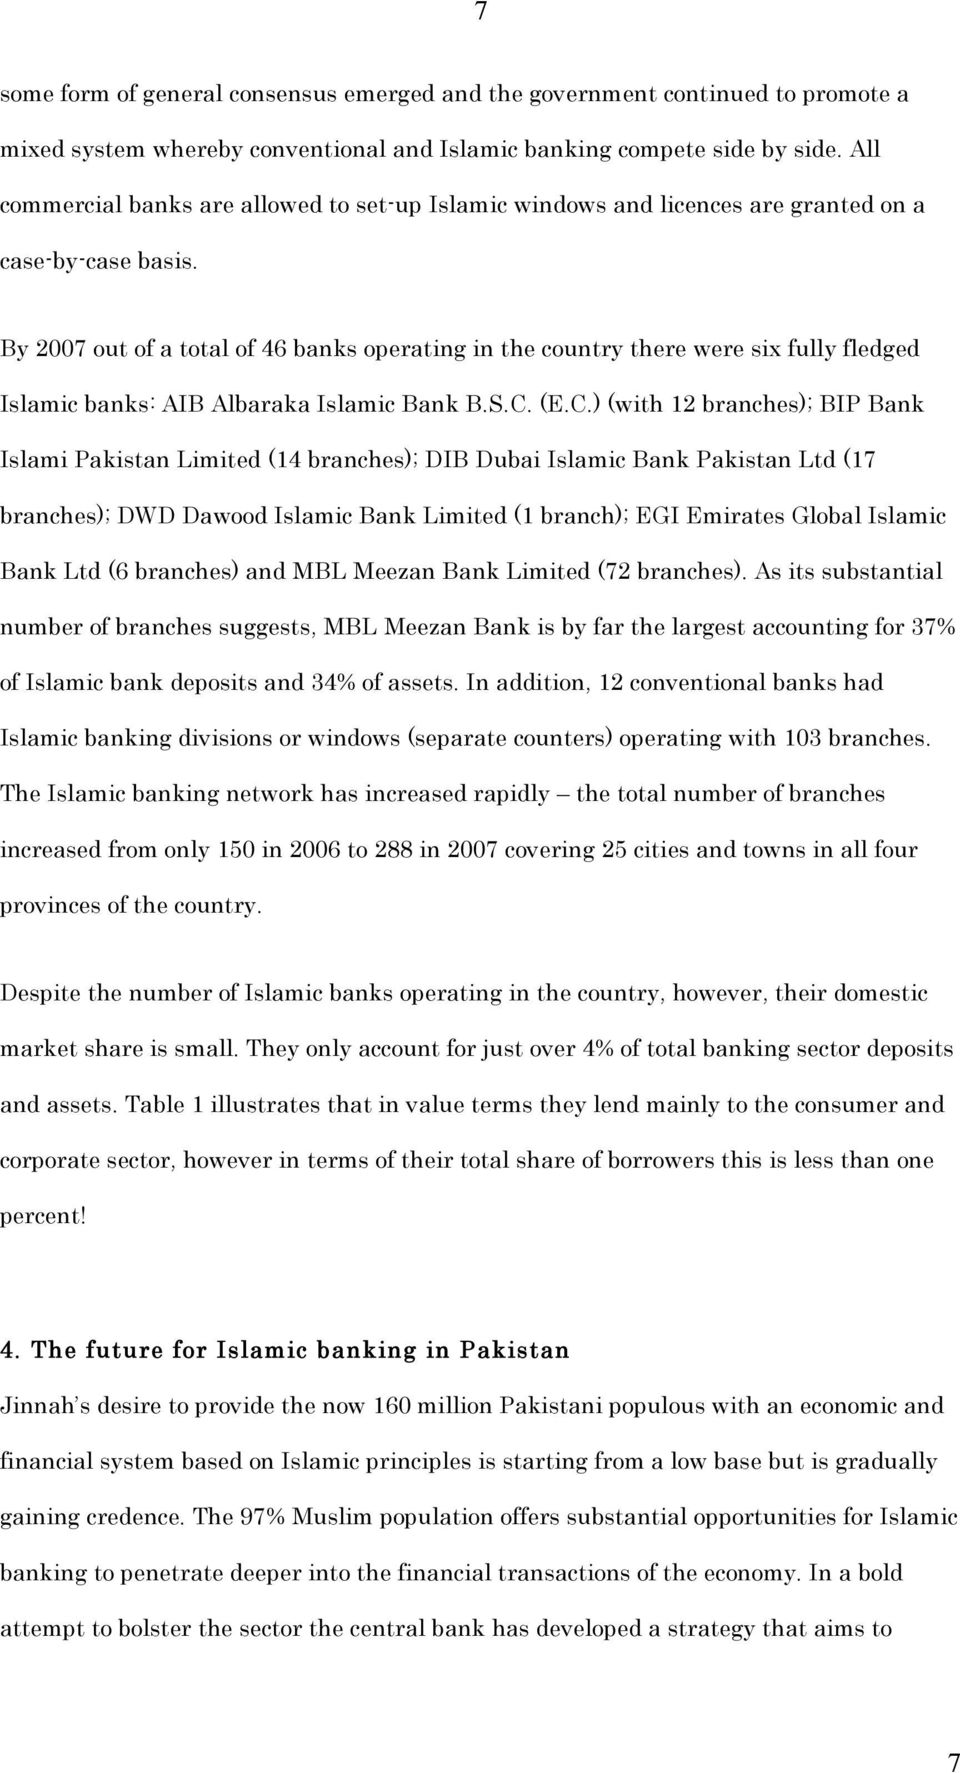 By 2007 out of a total of 46 banks operating in the country there were six fully fledged Islamic banks: AIB Albaraka Islamic Bank B.S.C.